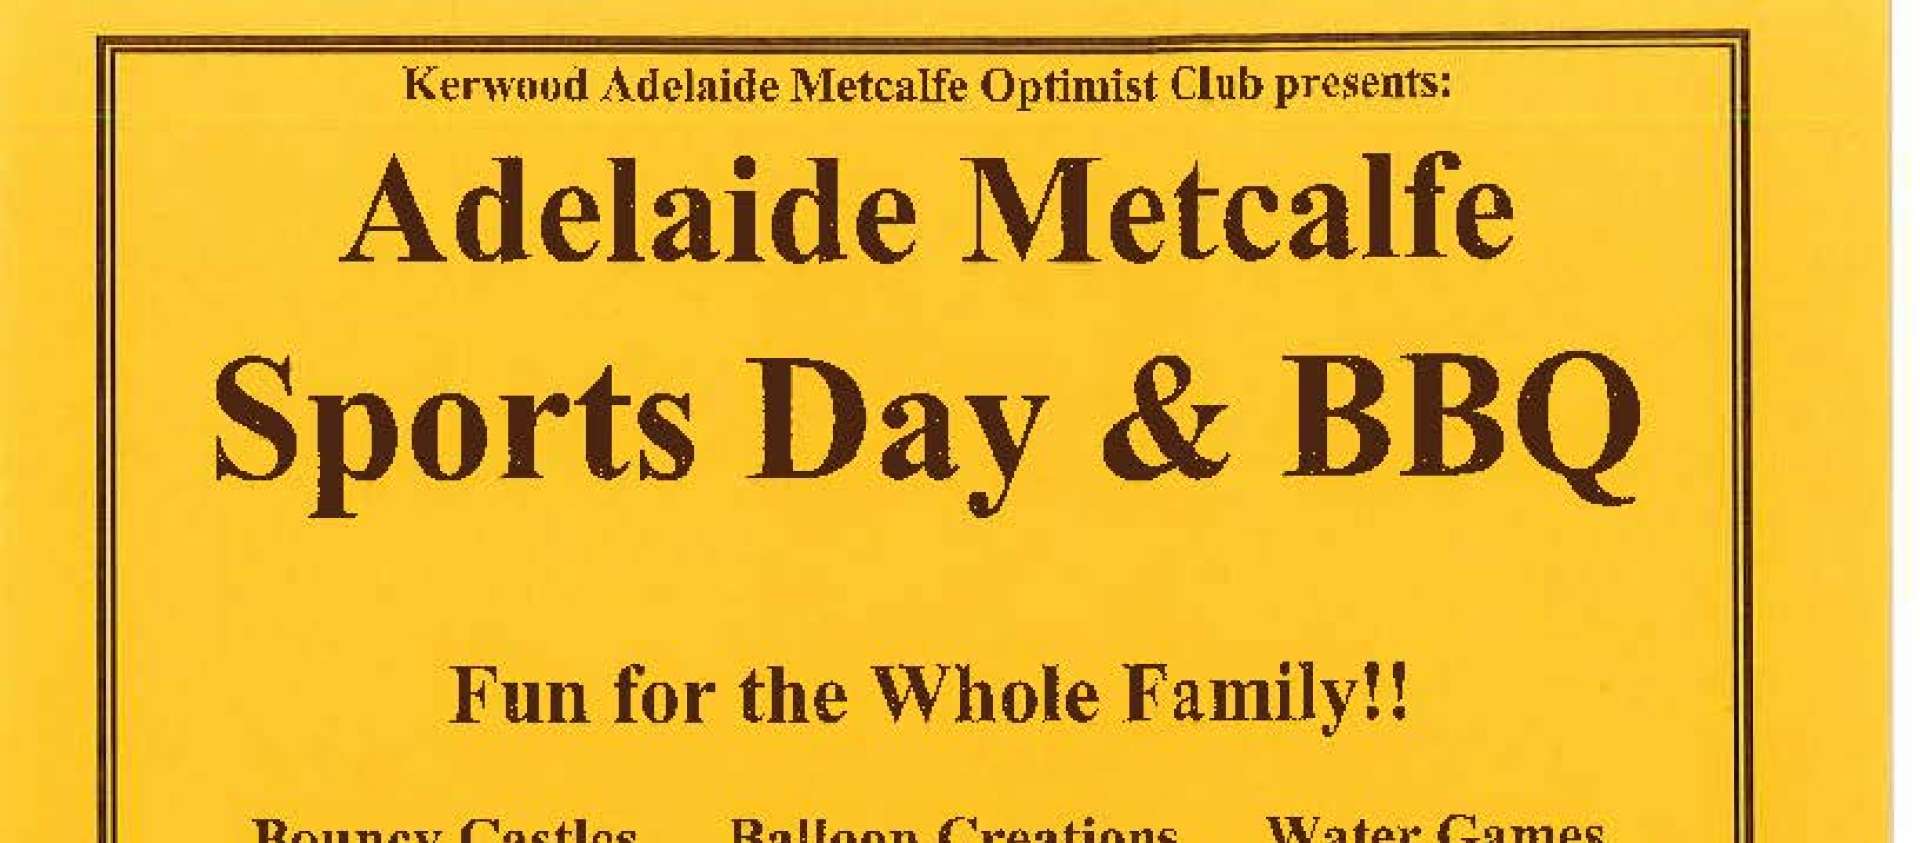 Picture of Flyer advertising Adelaide Metcalfe Sports Day & BBQ